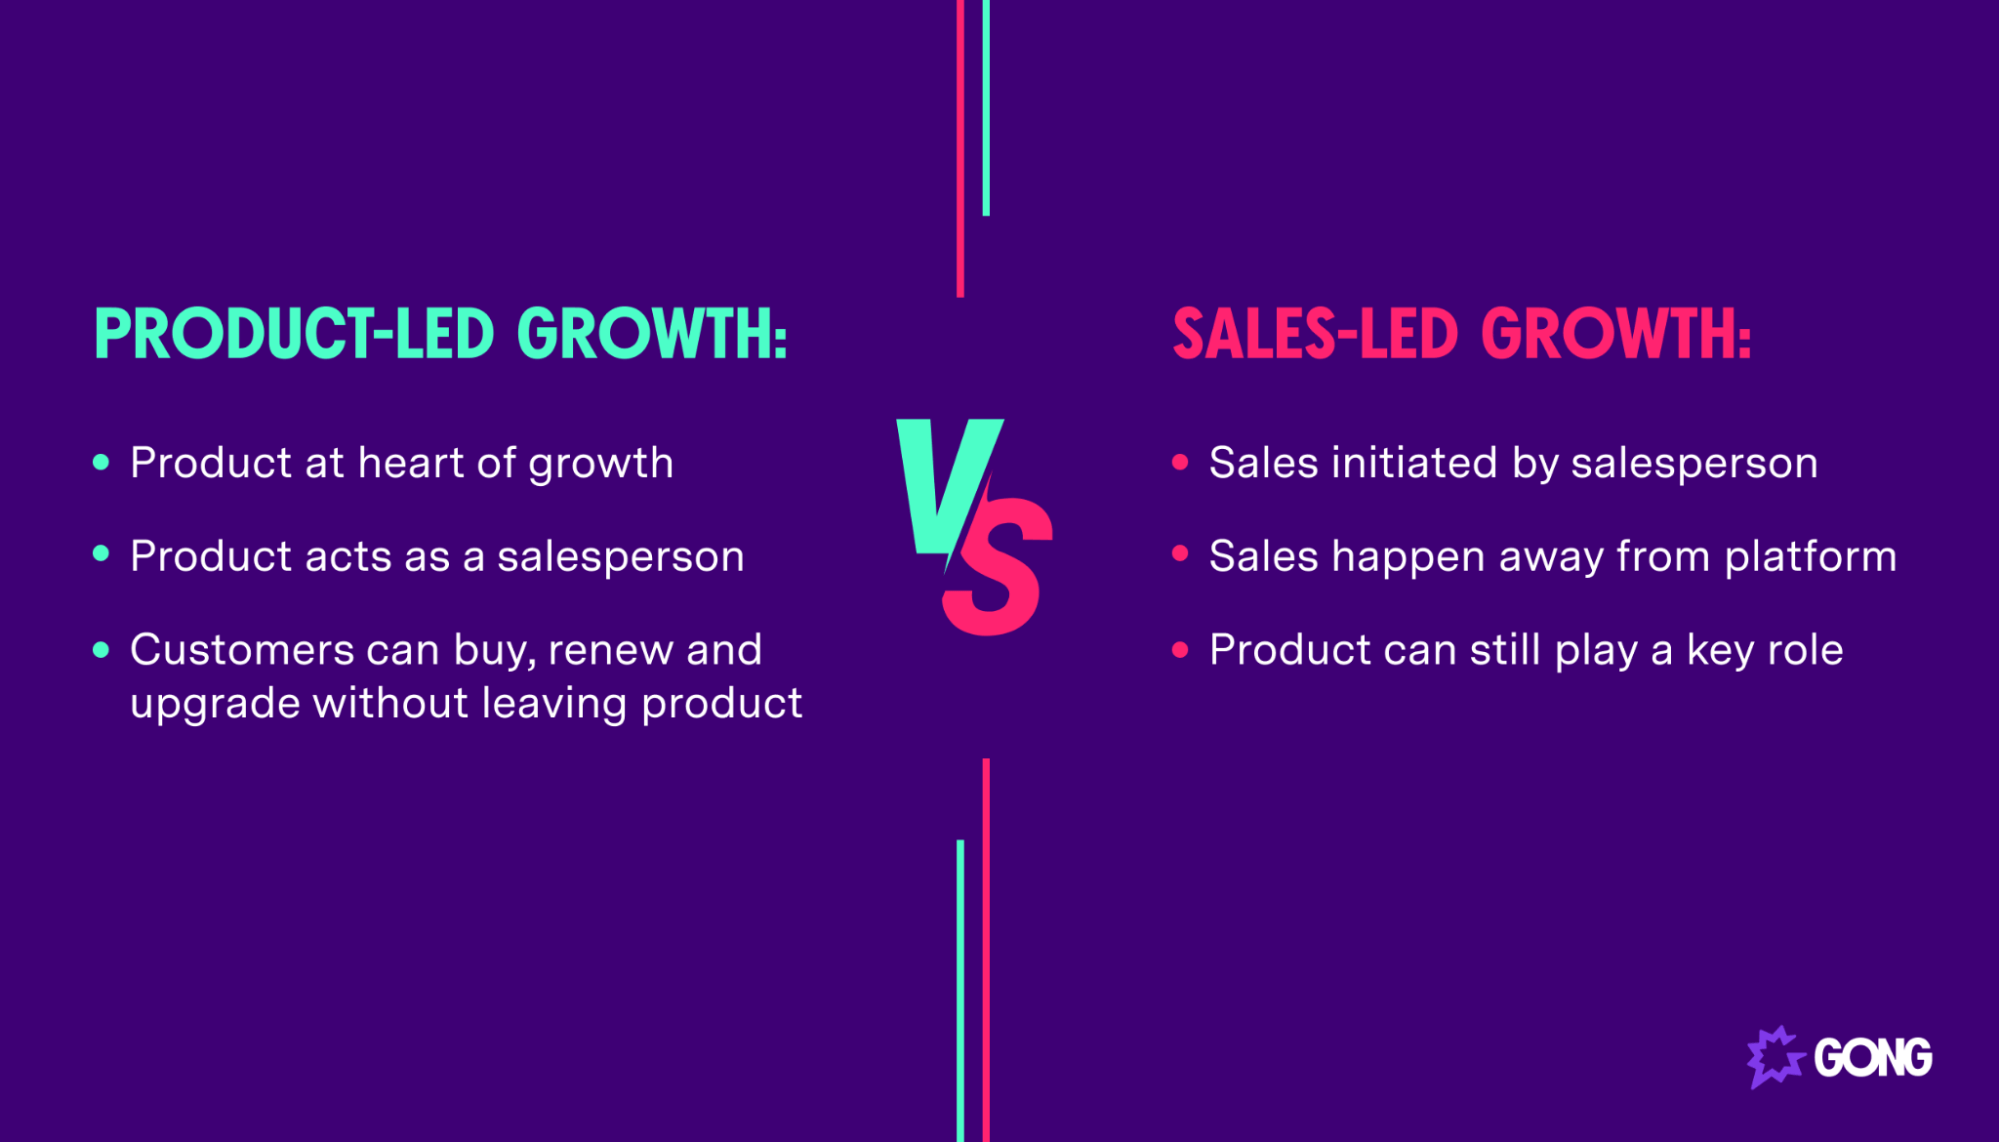 The difference between product-led growth and sales-led growth